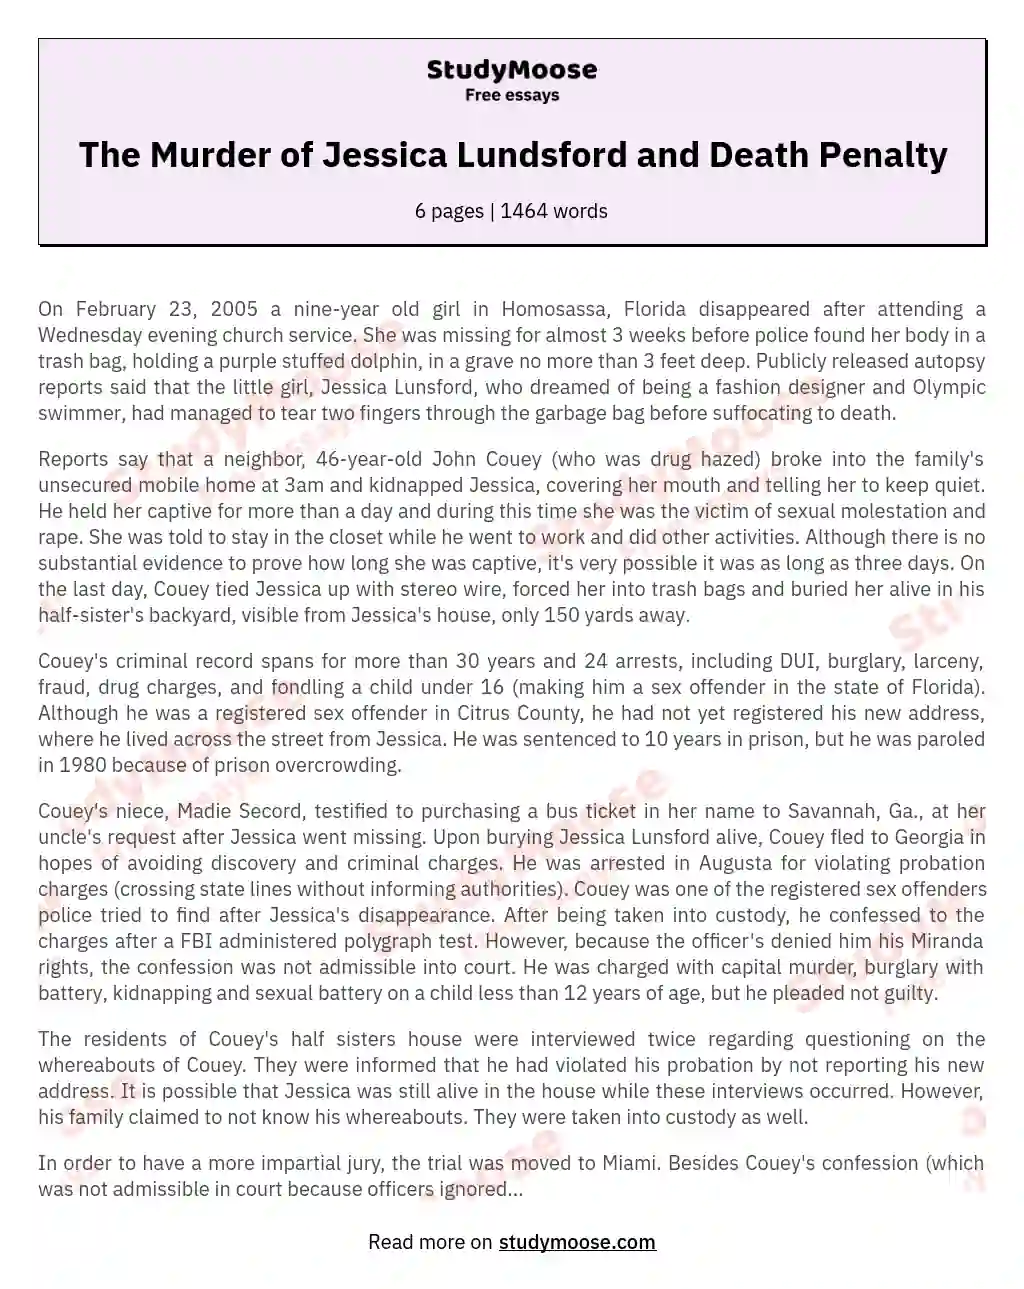 The Murder of Jessica Lundsford and Death Penalty